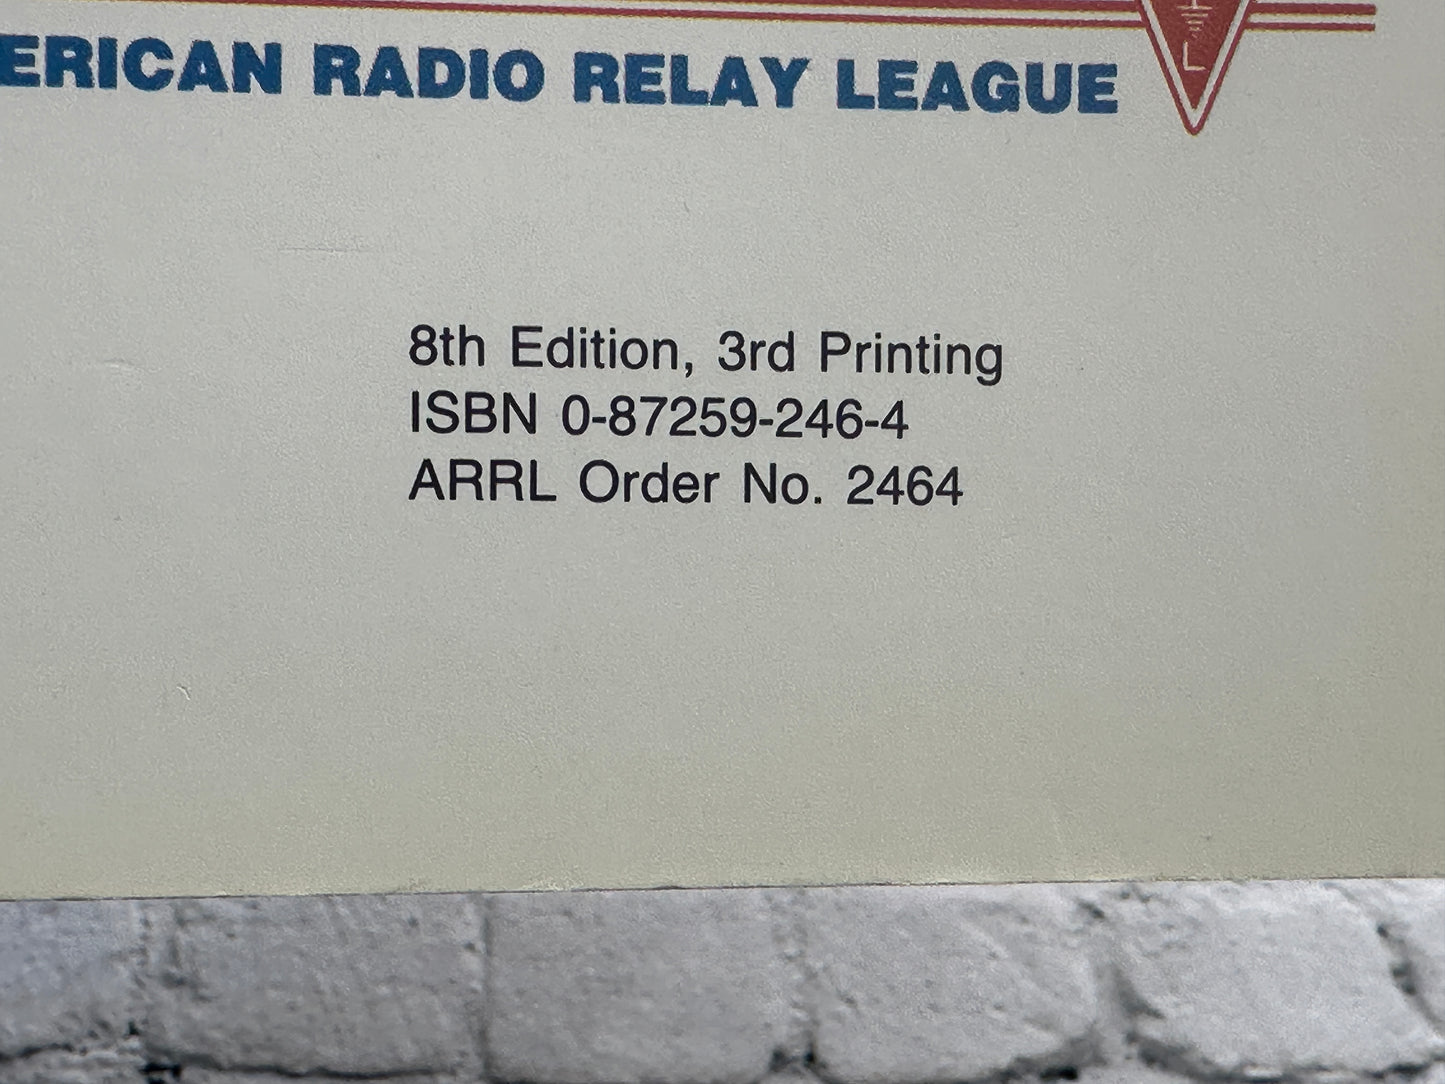 Tune in the World with Ham Radio by The American Radio Relay League [1990 · 8th]